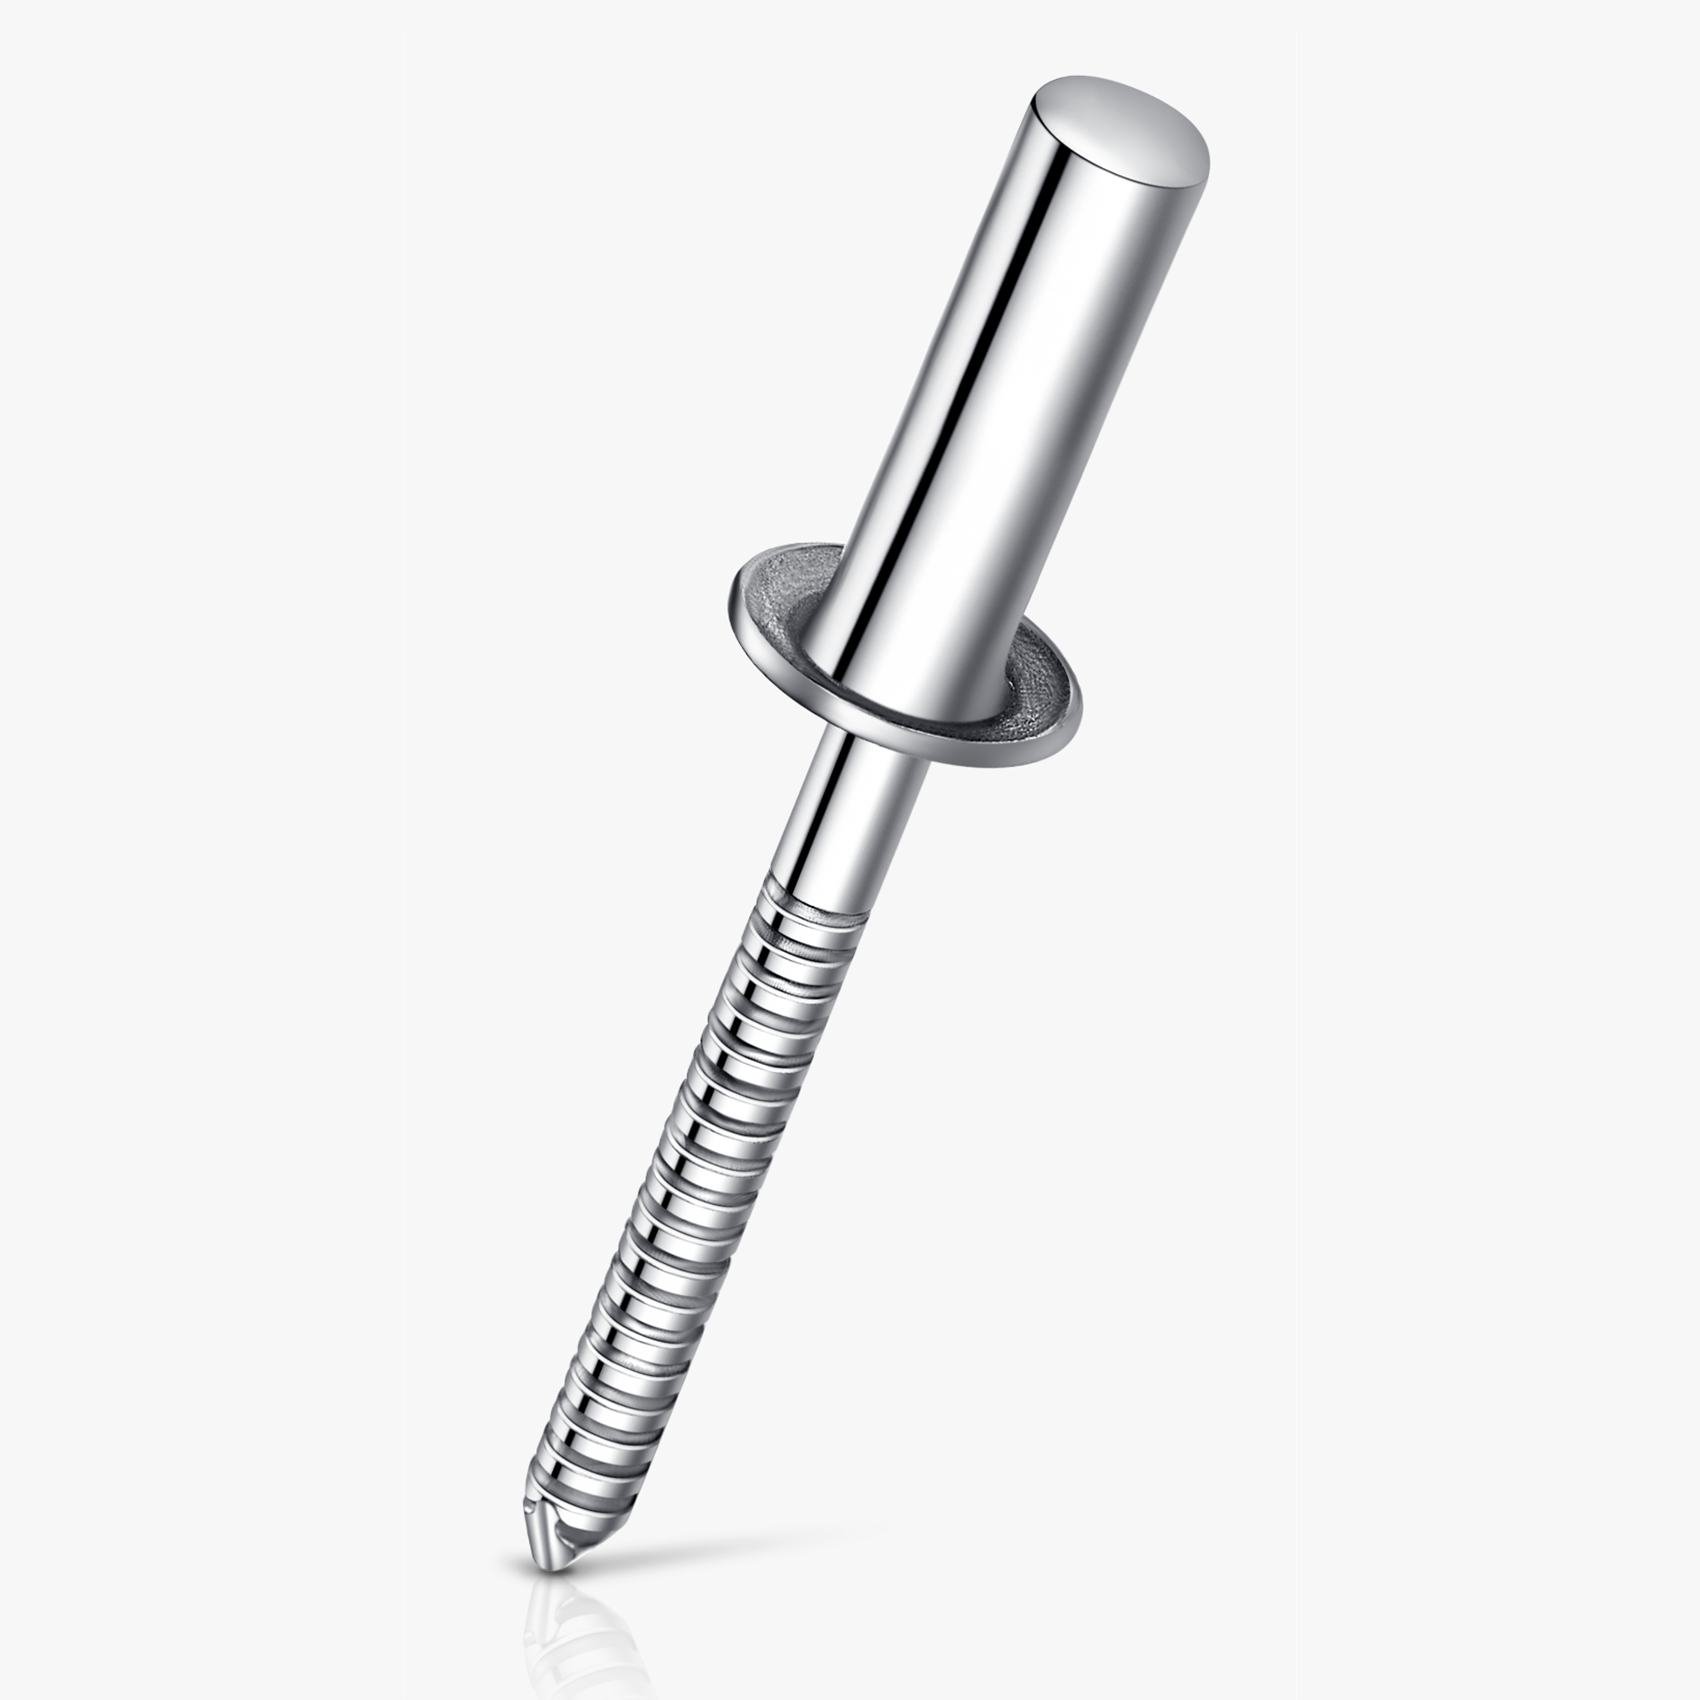  Closed Type Blind Rivets Suppliers in Mumbai India